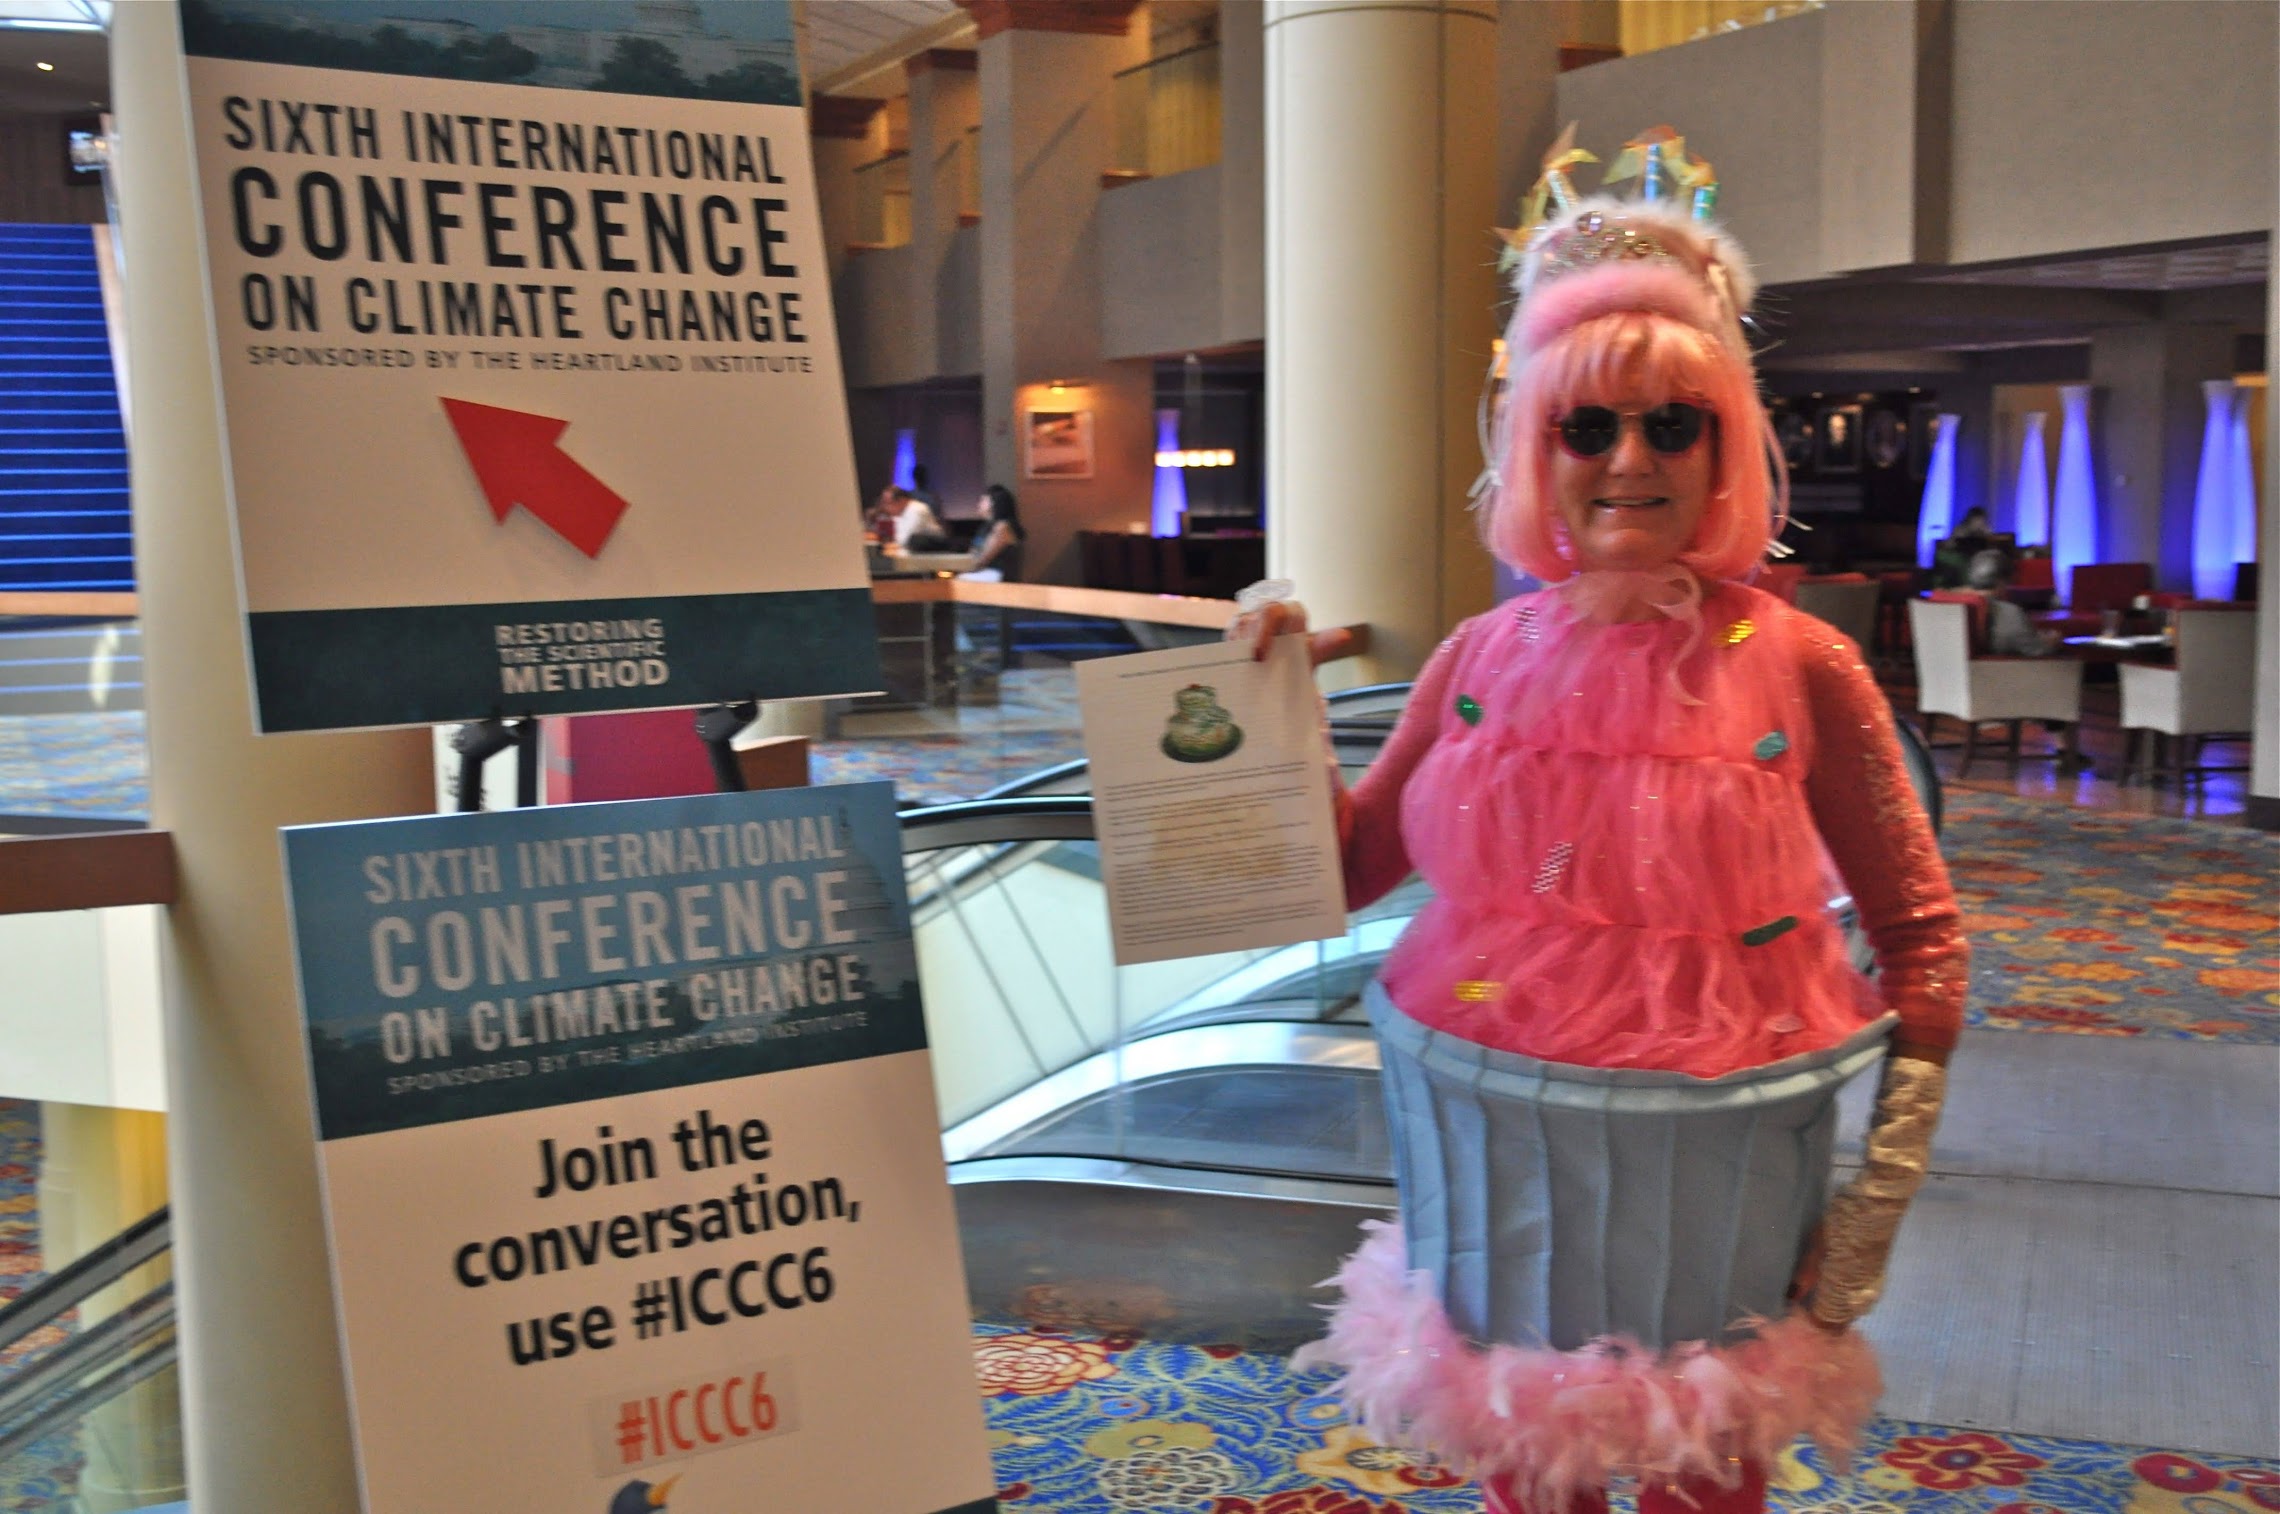 Gail Zawacki in cupcake costume protesting at the Heartland Institute’s sixth international climate denial conference, 30 June 2011. She designed the cupcake costume “to demonstrate in a non-threatening, cheerful image the simple verity that ‘climate change is baked in the cake’”. Photo: Gail Zawacki